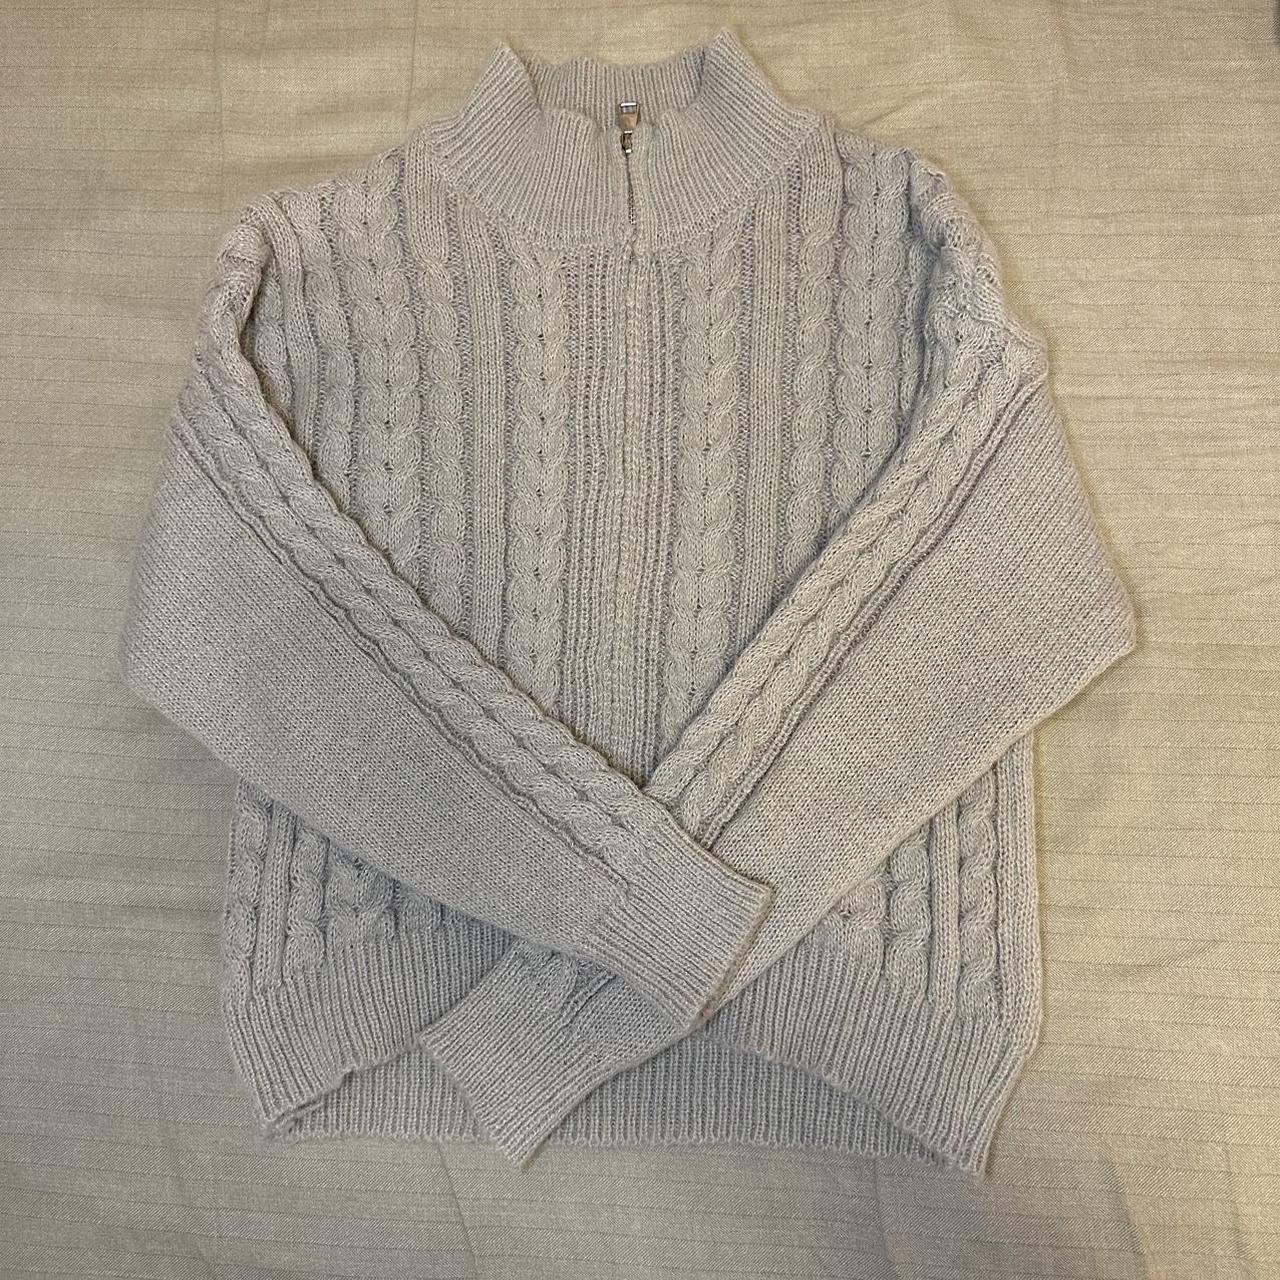 Grey knit sweater, never worn, bought from a Korean... - Depop